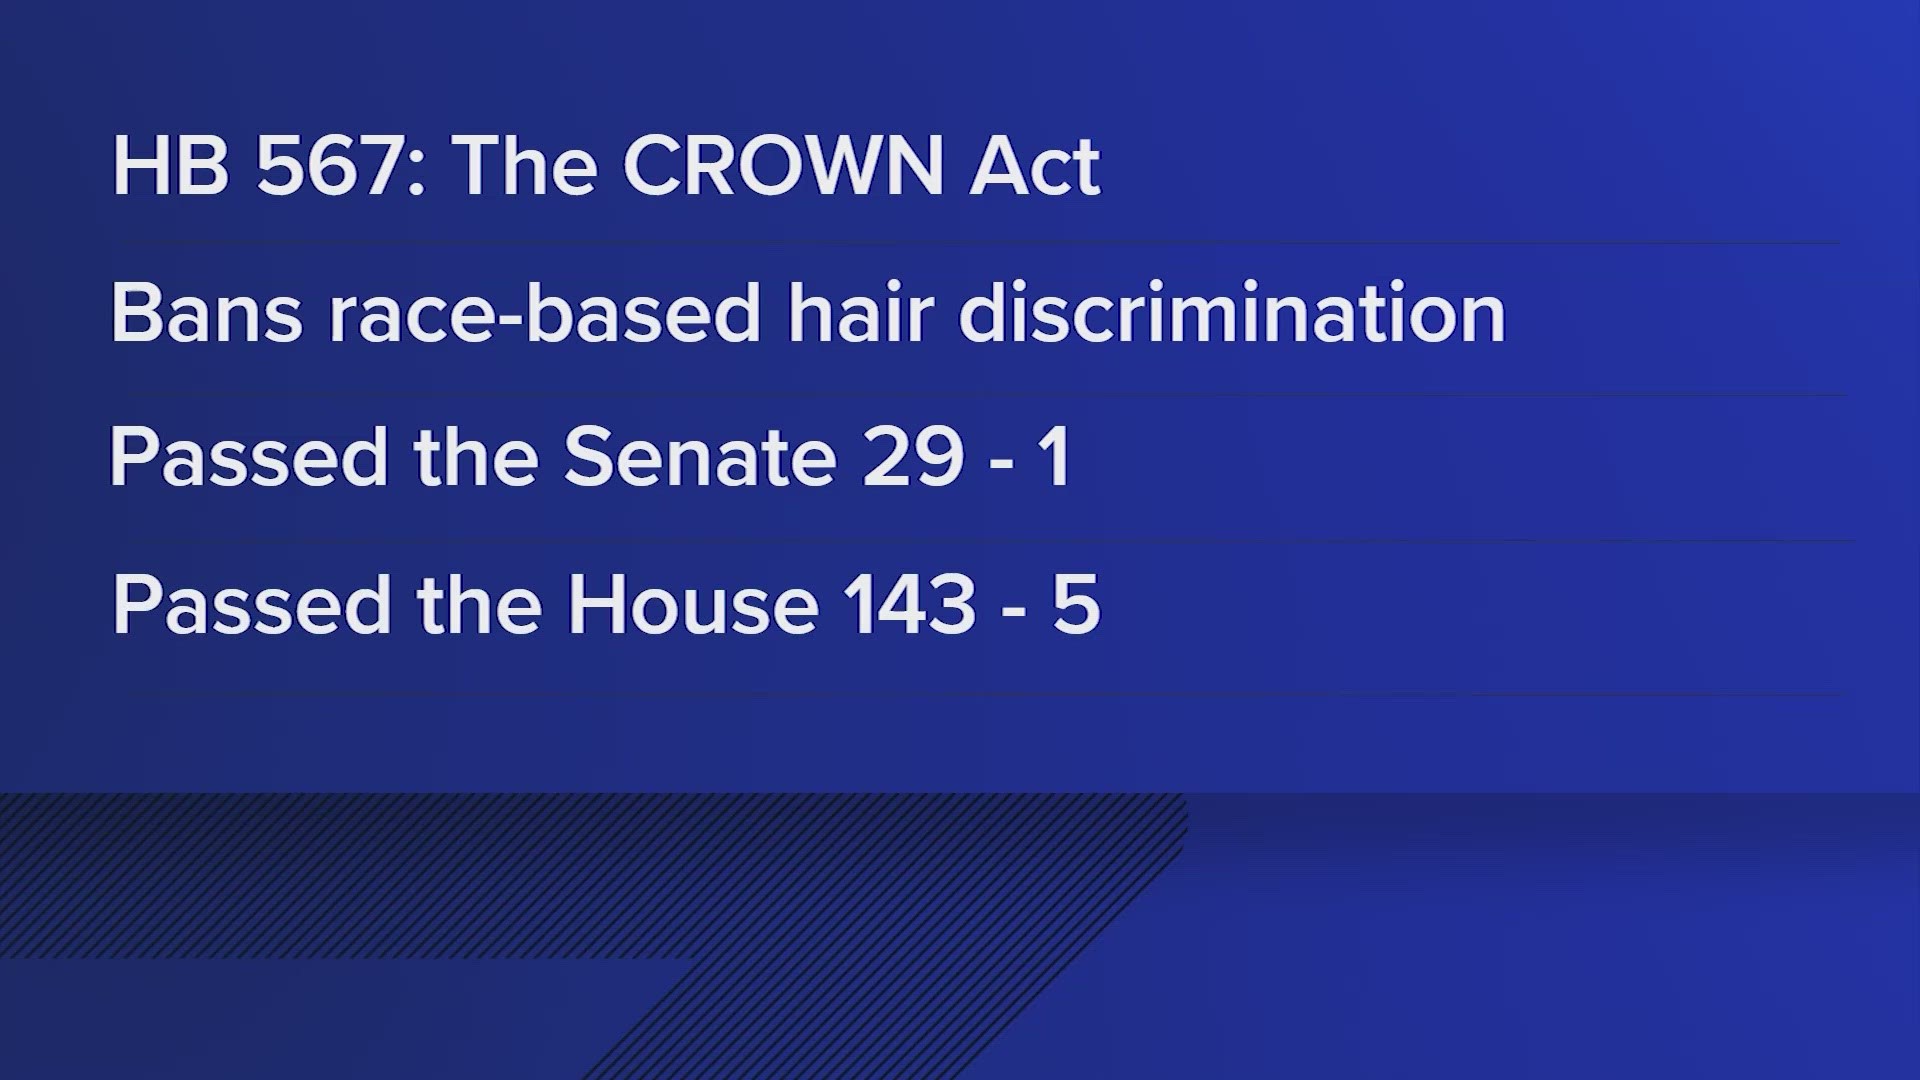 HB 567 would prohibit schools and workplaces from discriminating based on natural hair and certain hairstyles — including braids, dreadlocks and twists.